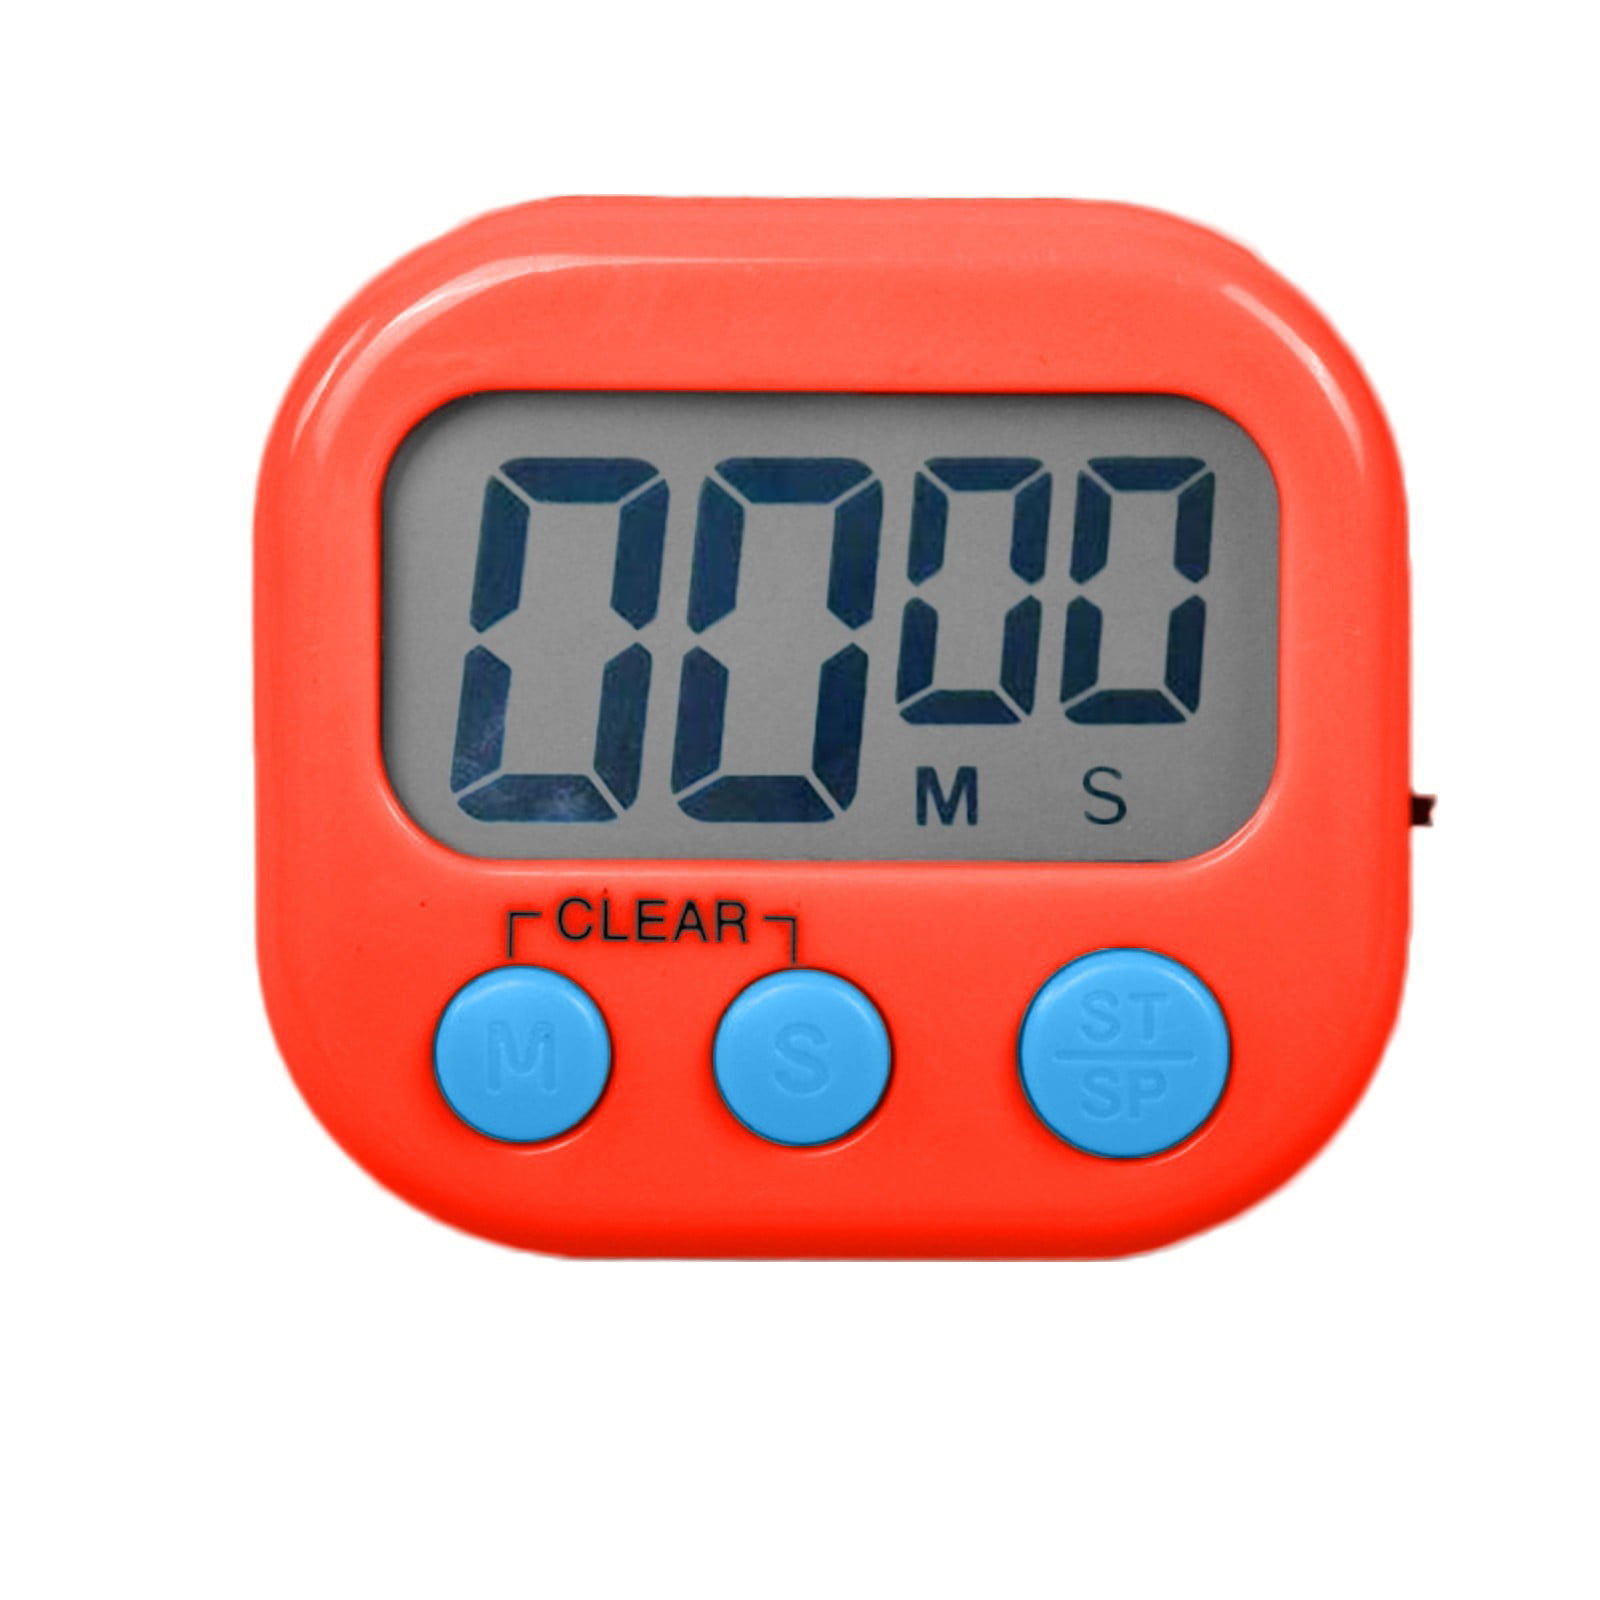 Red Learning Resources Simple Digital Stopwatch for Kids Teachers Classrooms